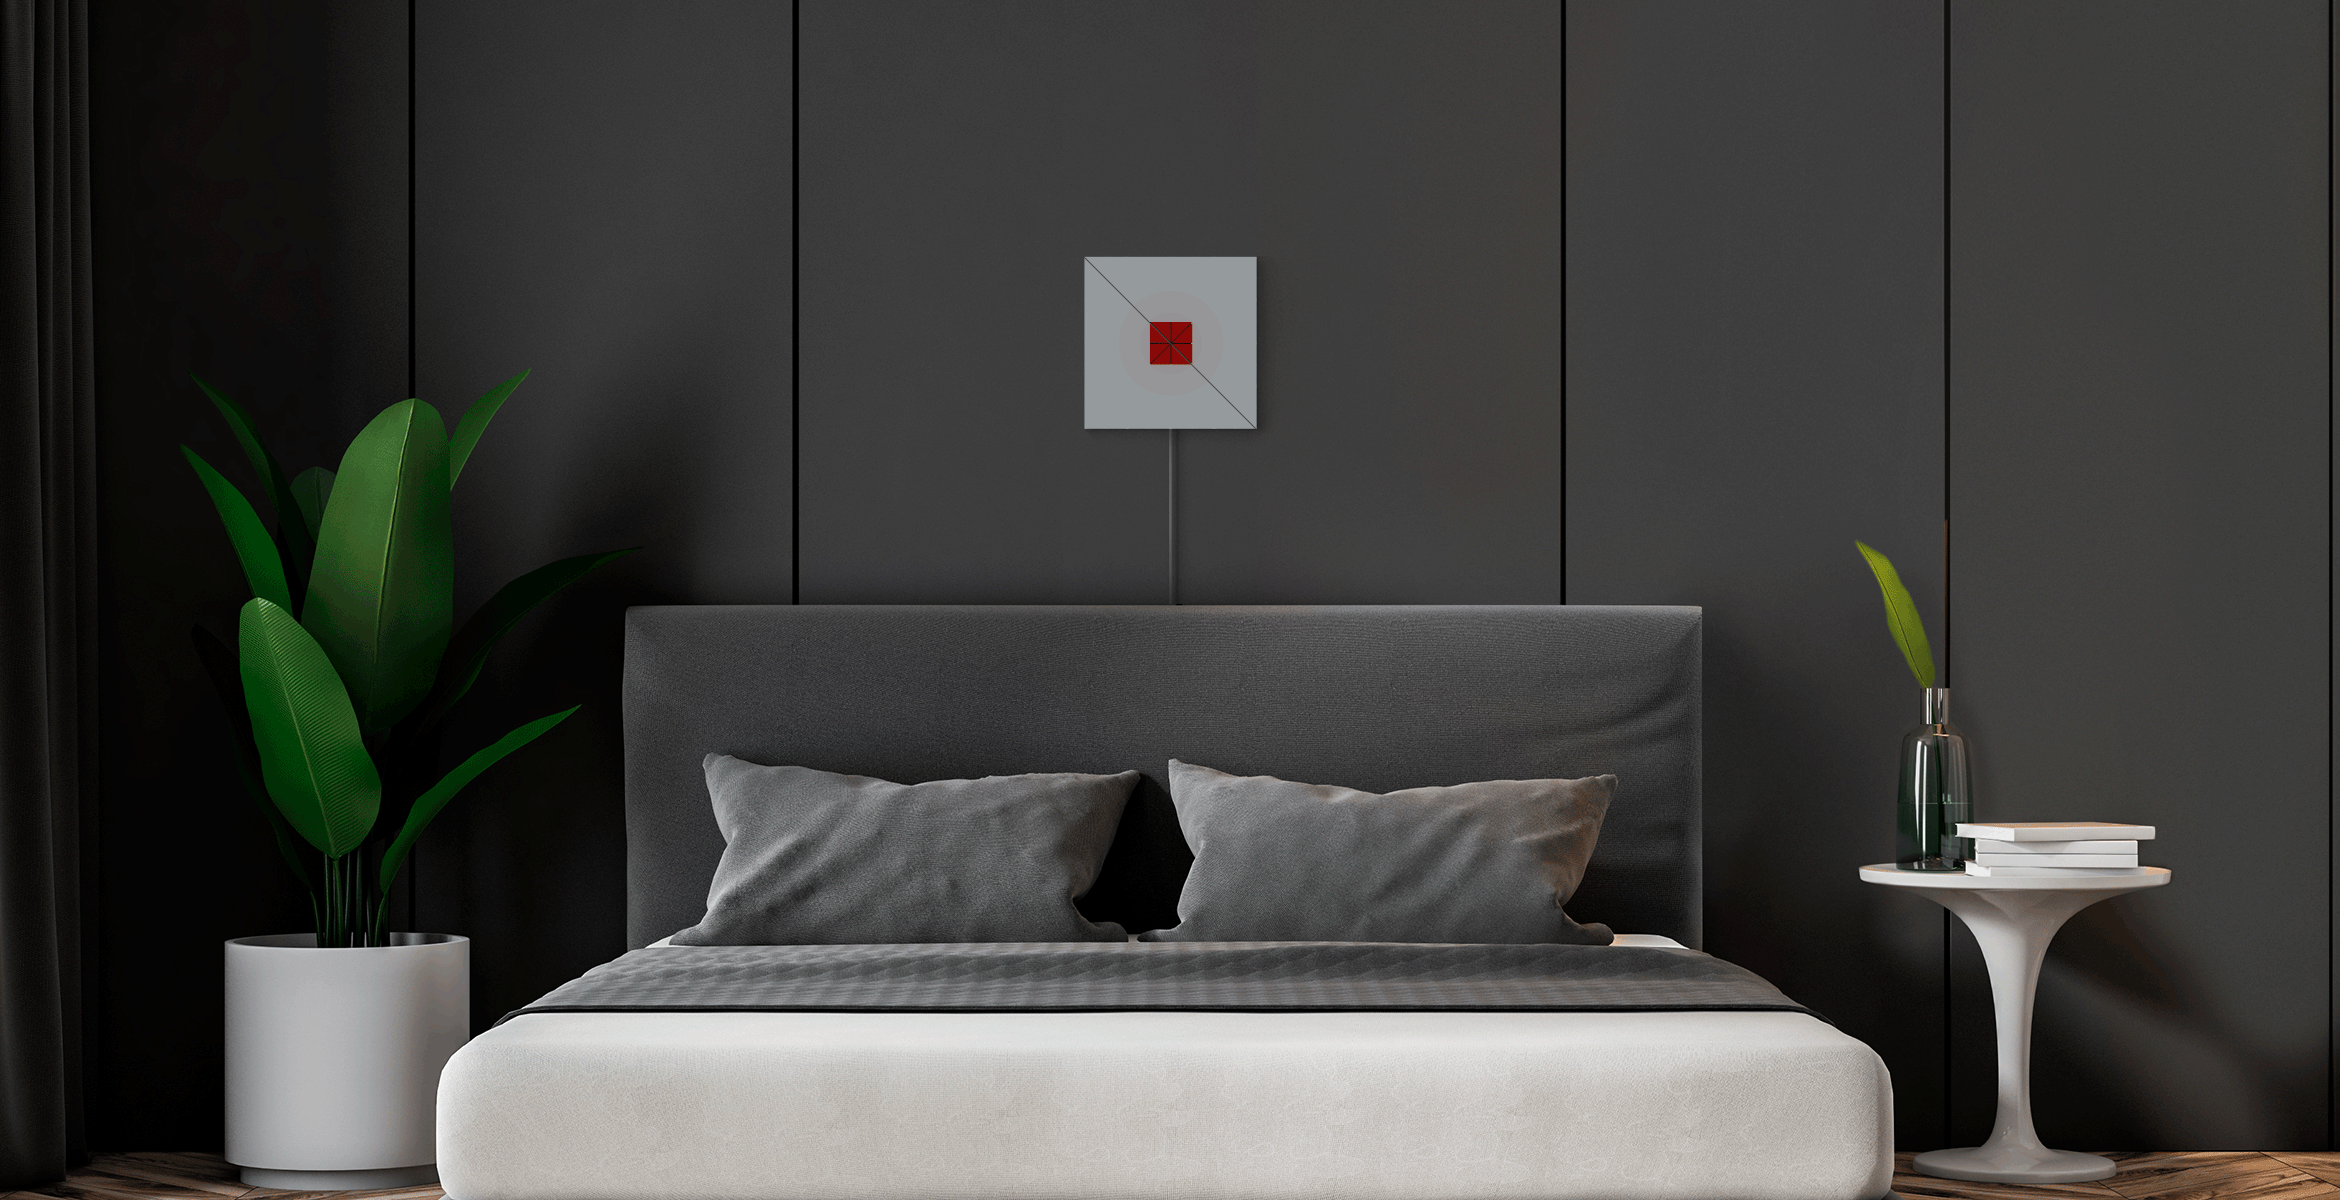 SKY face shape, assembled from 4 smart light surfaces, displays a heart light effect and complements bedroom's interior